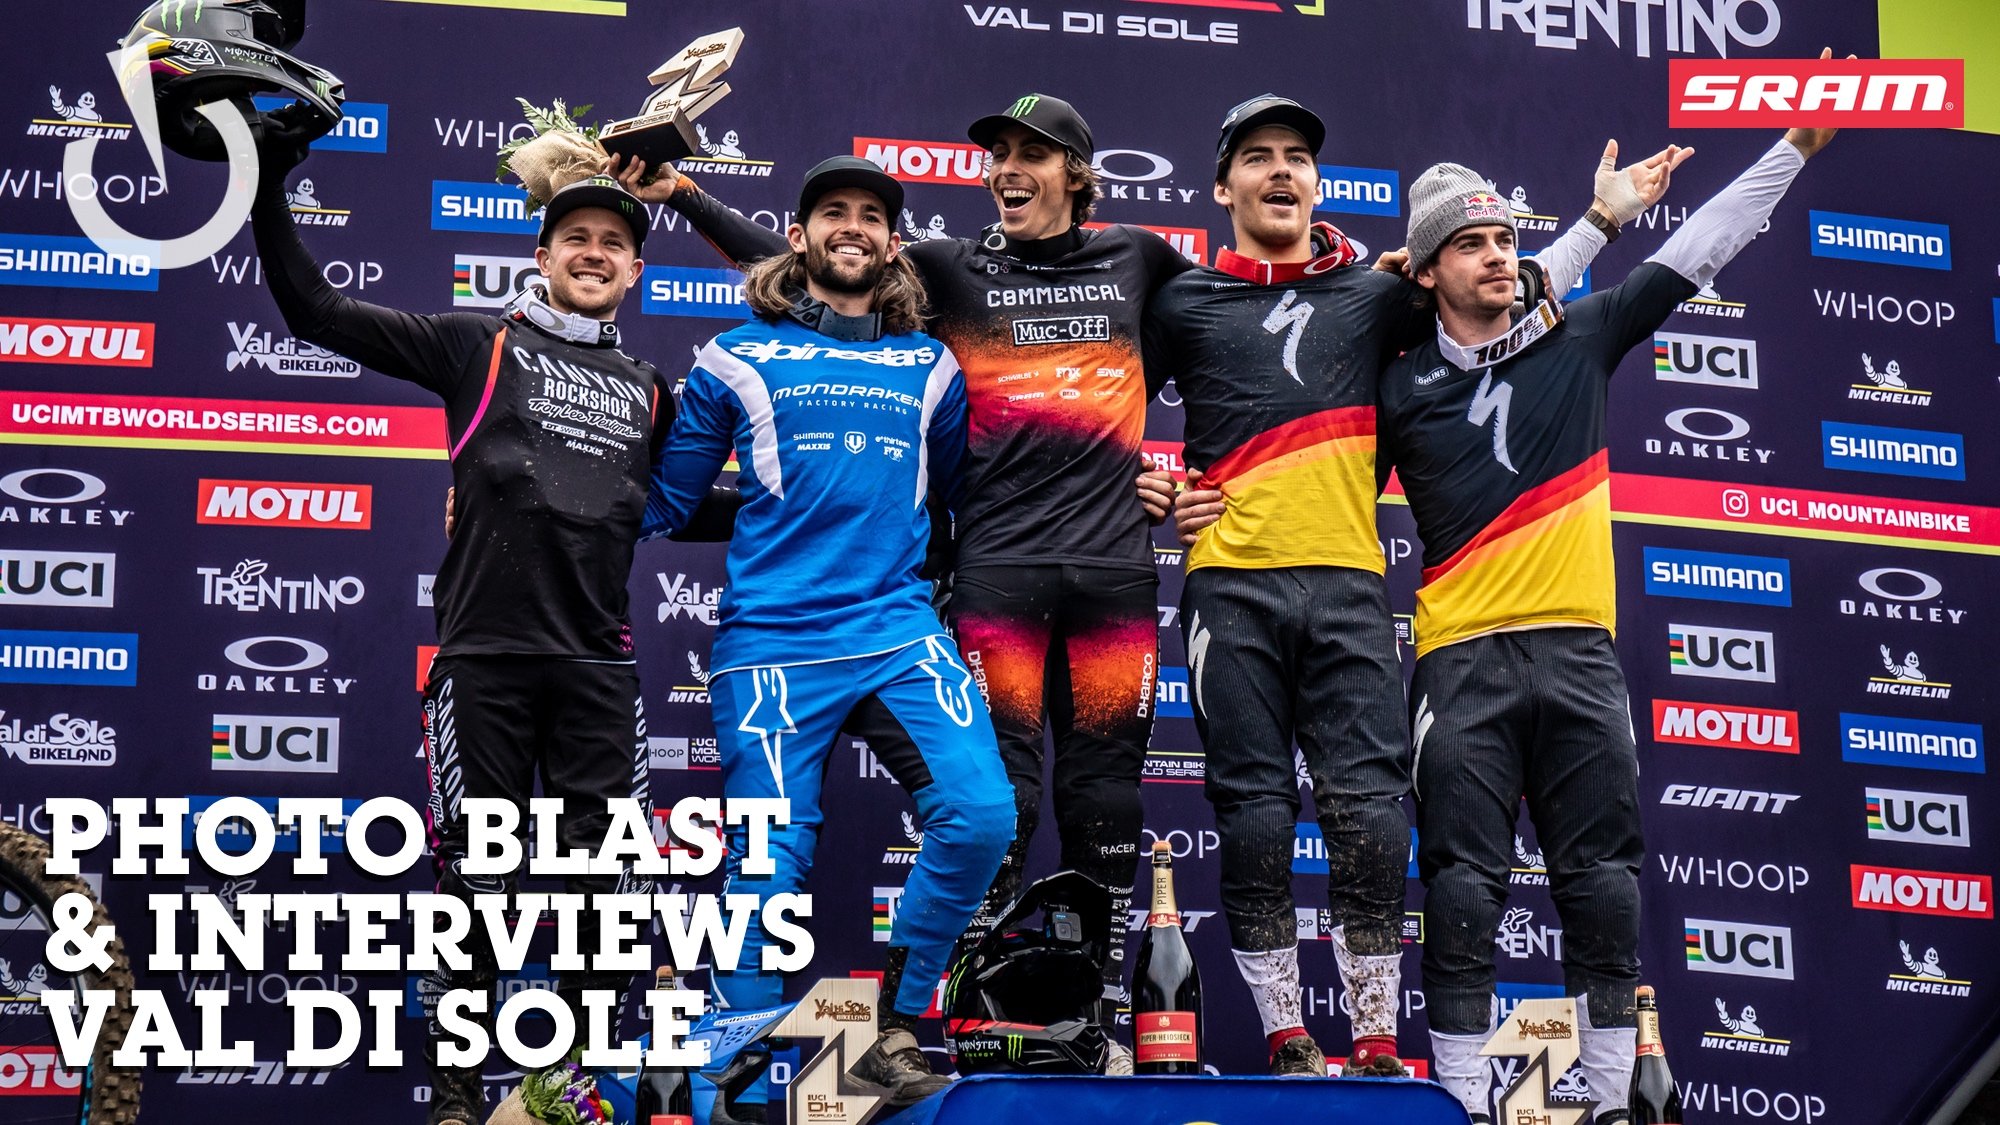 Photo Blast and Podium Interviews - Val di Sole Race Weekend